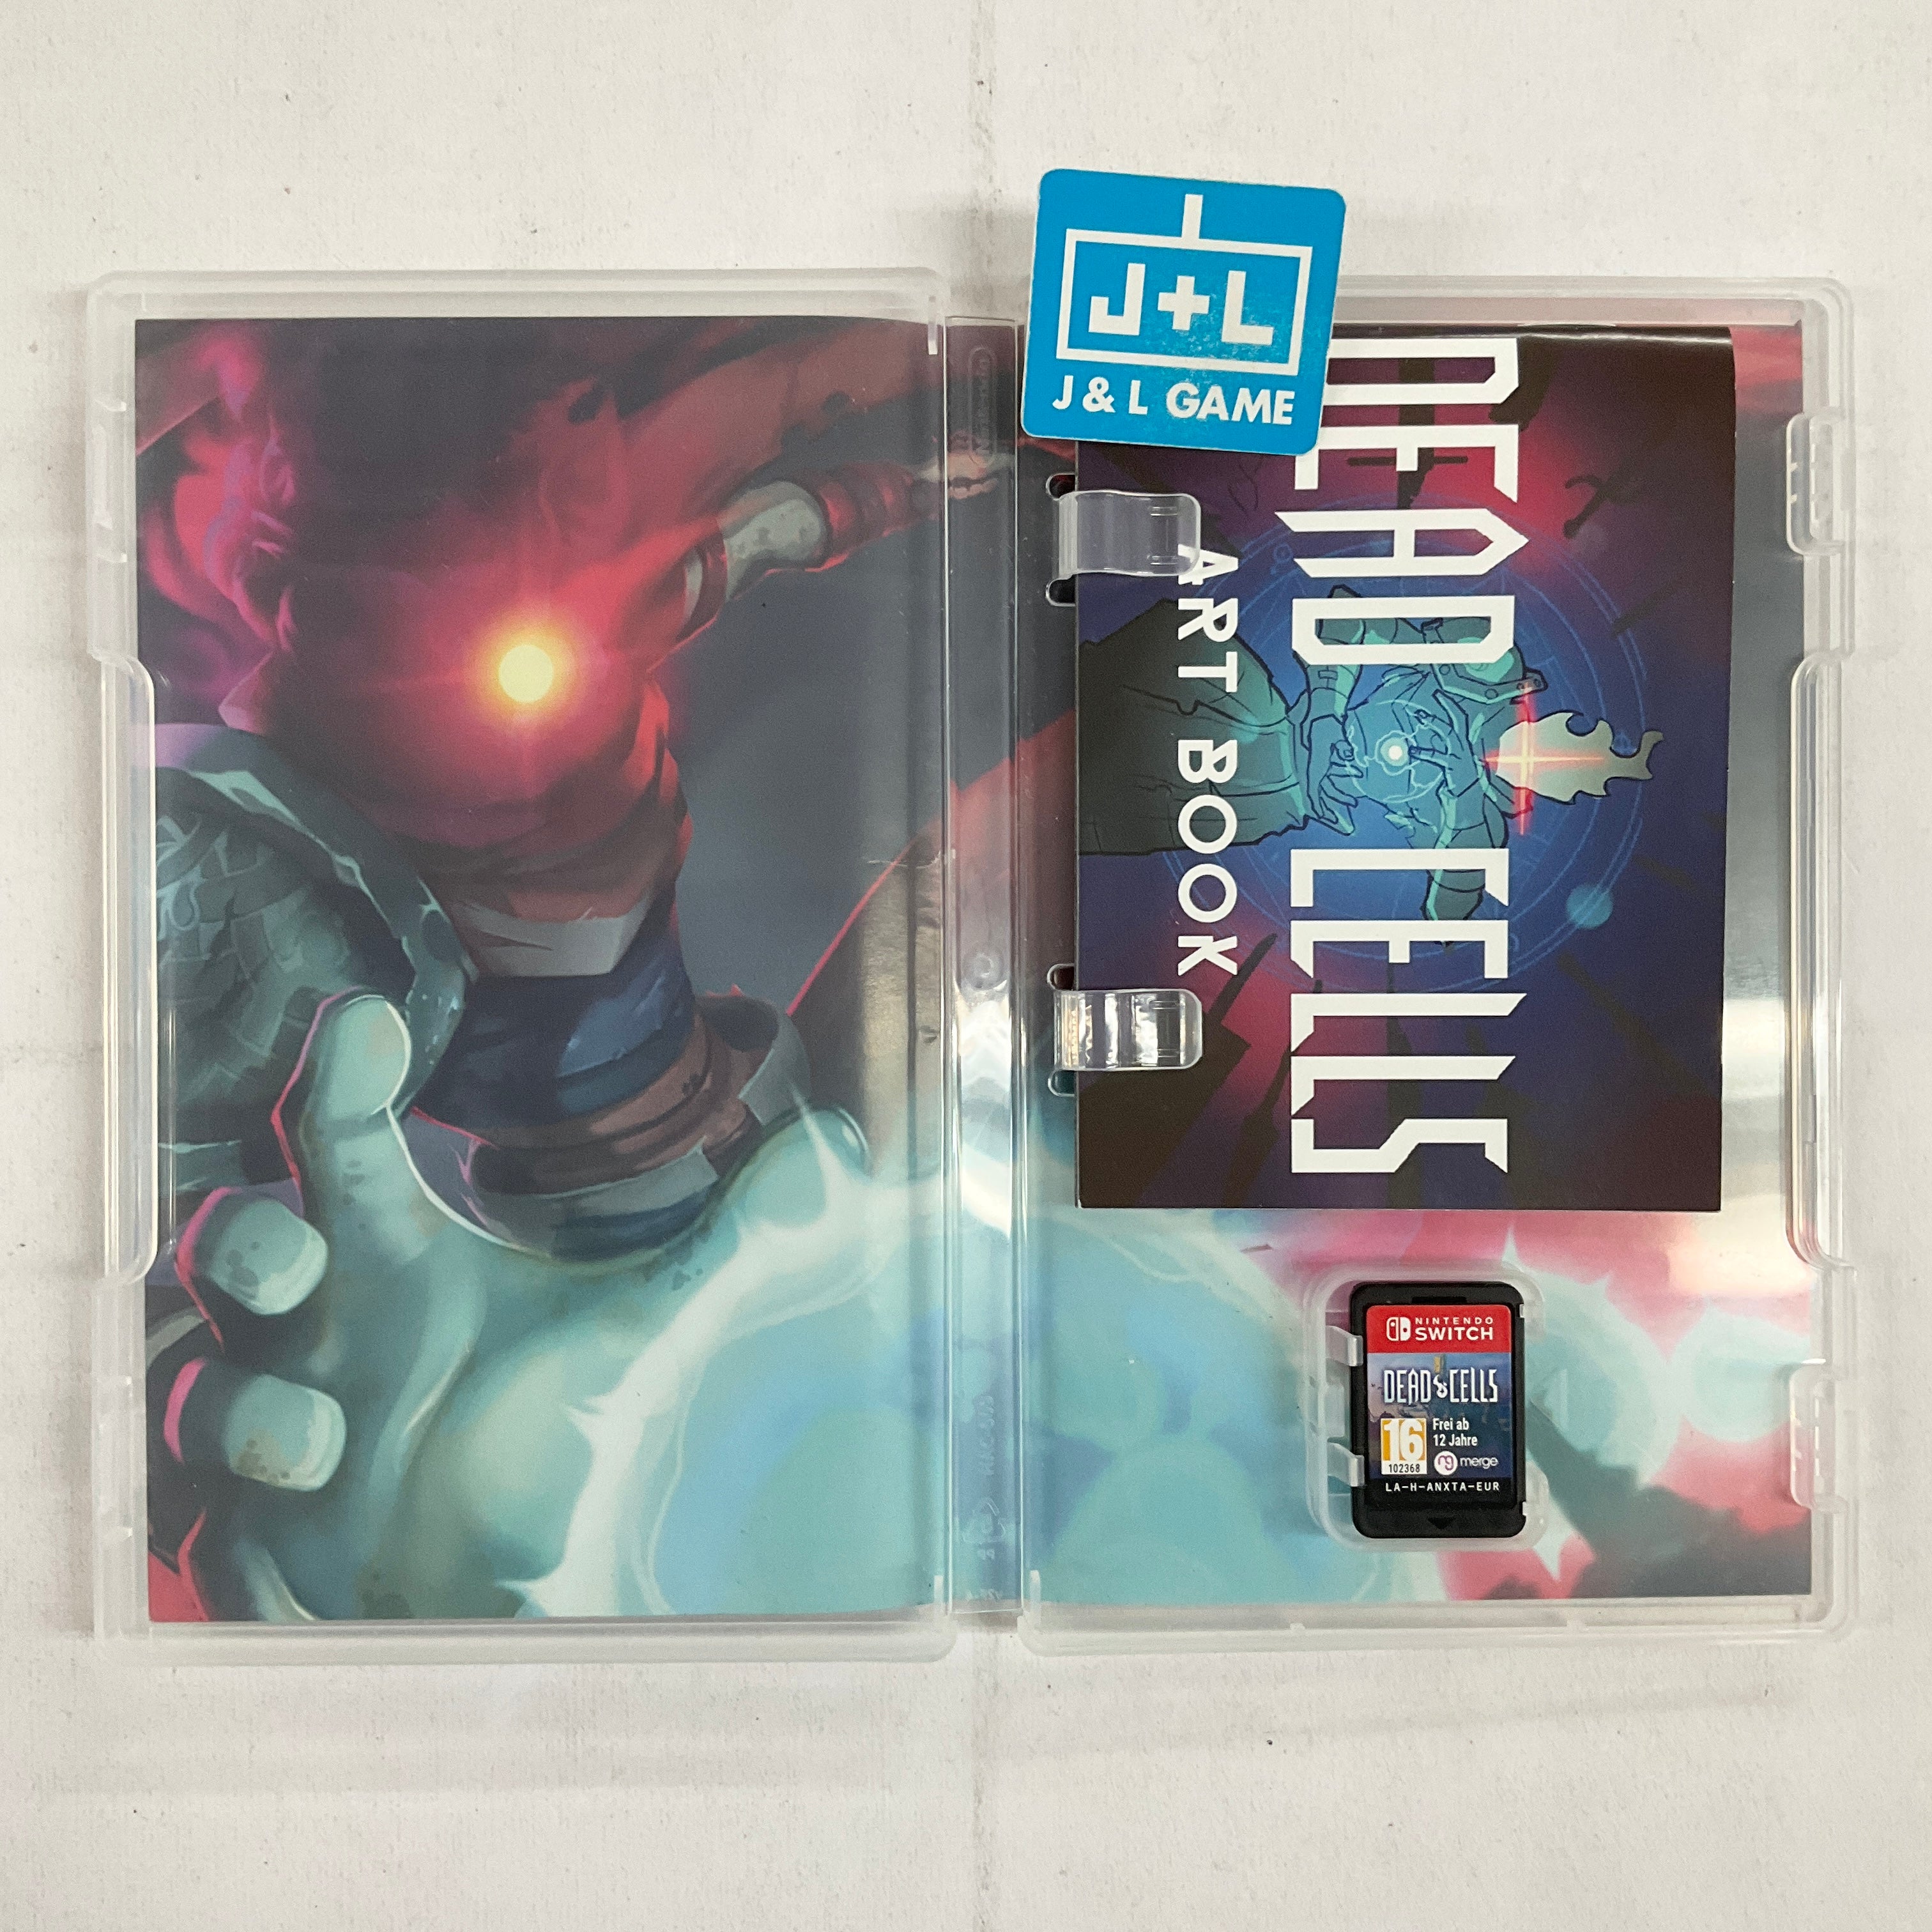 Dead Cells - (NSW) Nintendo Switch [Pre-Owned] (European Import) Video Games Merge Games   